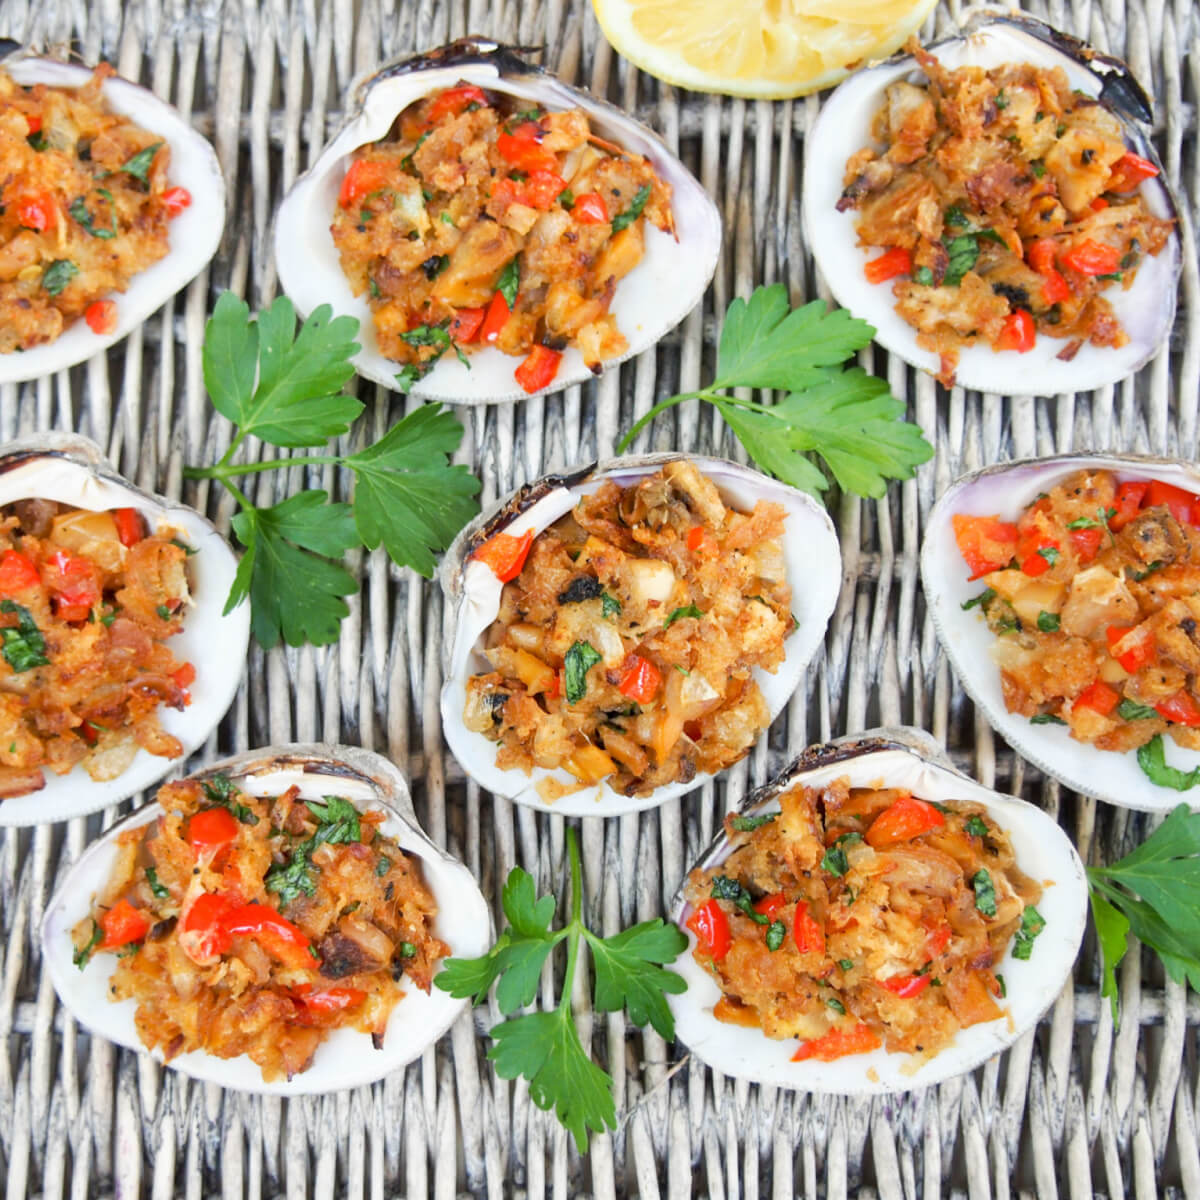 https://www.carolinescooking.com/wp-content/uploads/2021/04/New-England-stuffed-clams-featured-pic-sq.jpg